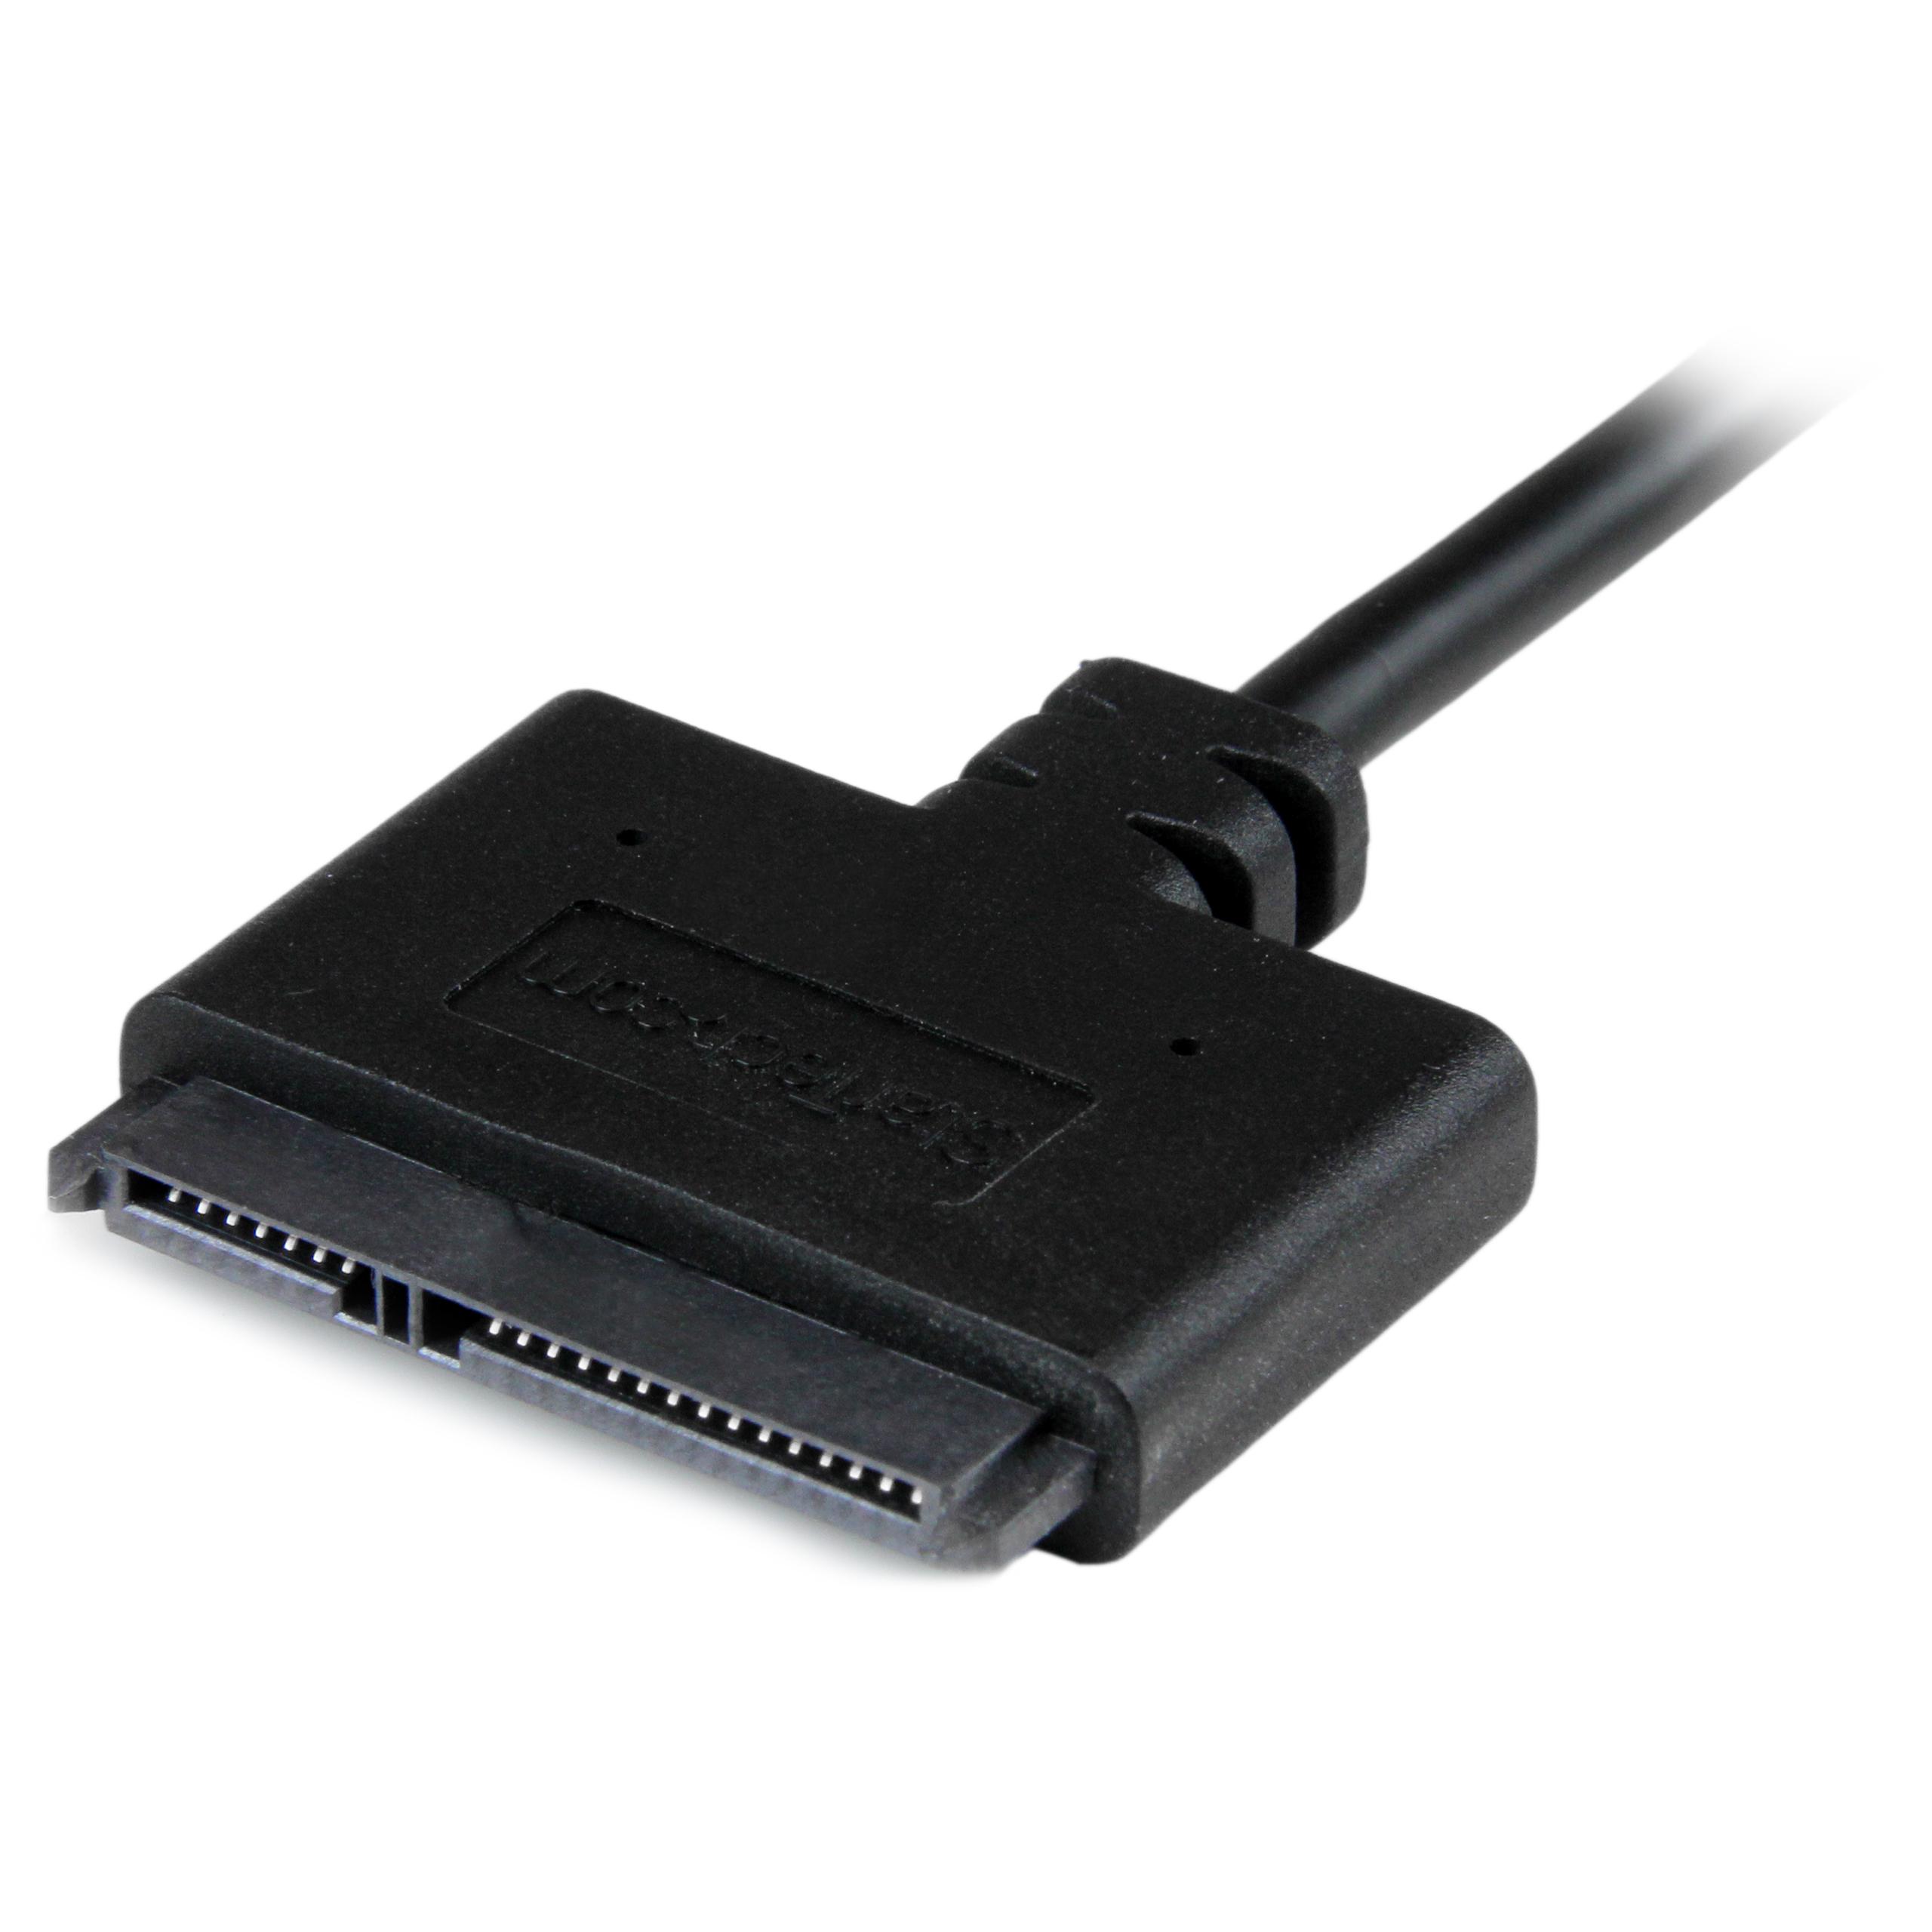 Targus easy file transfer cable for mac